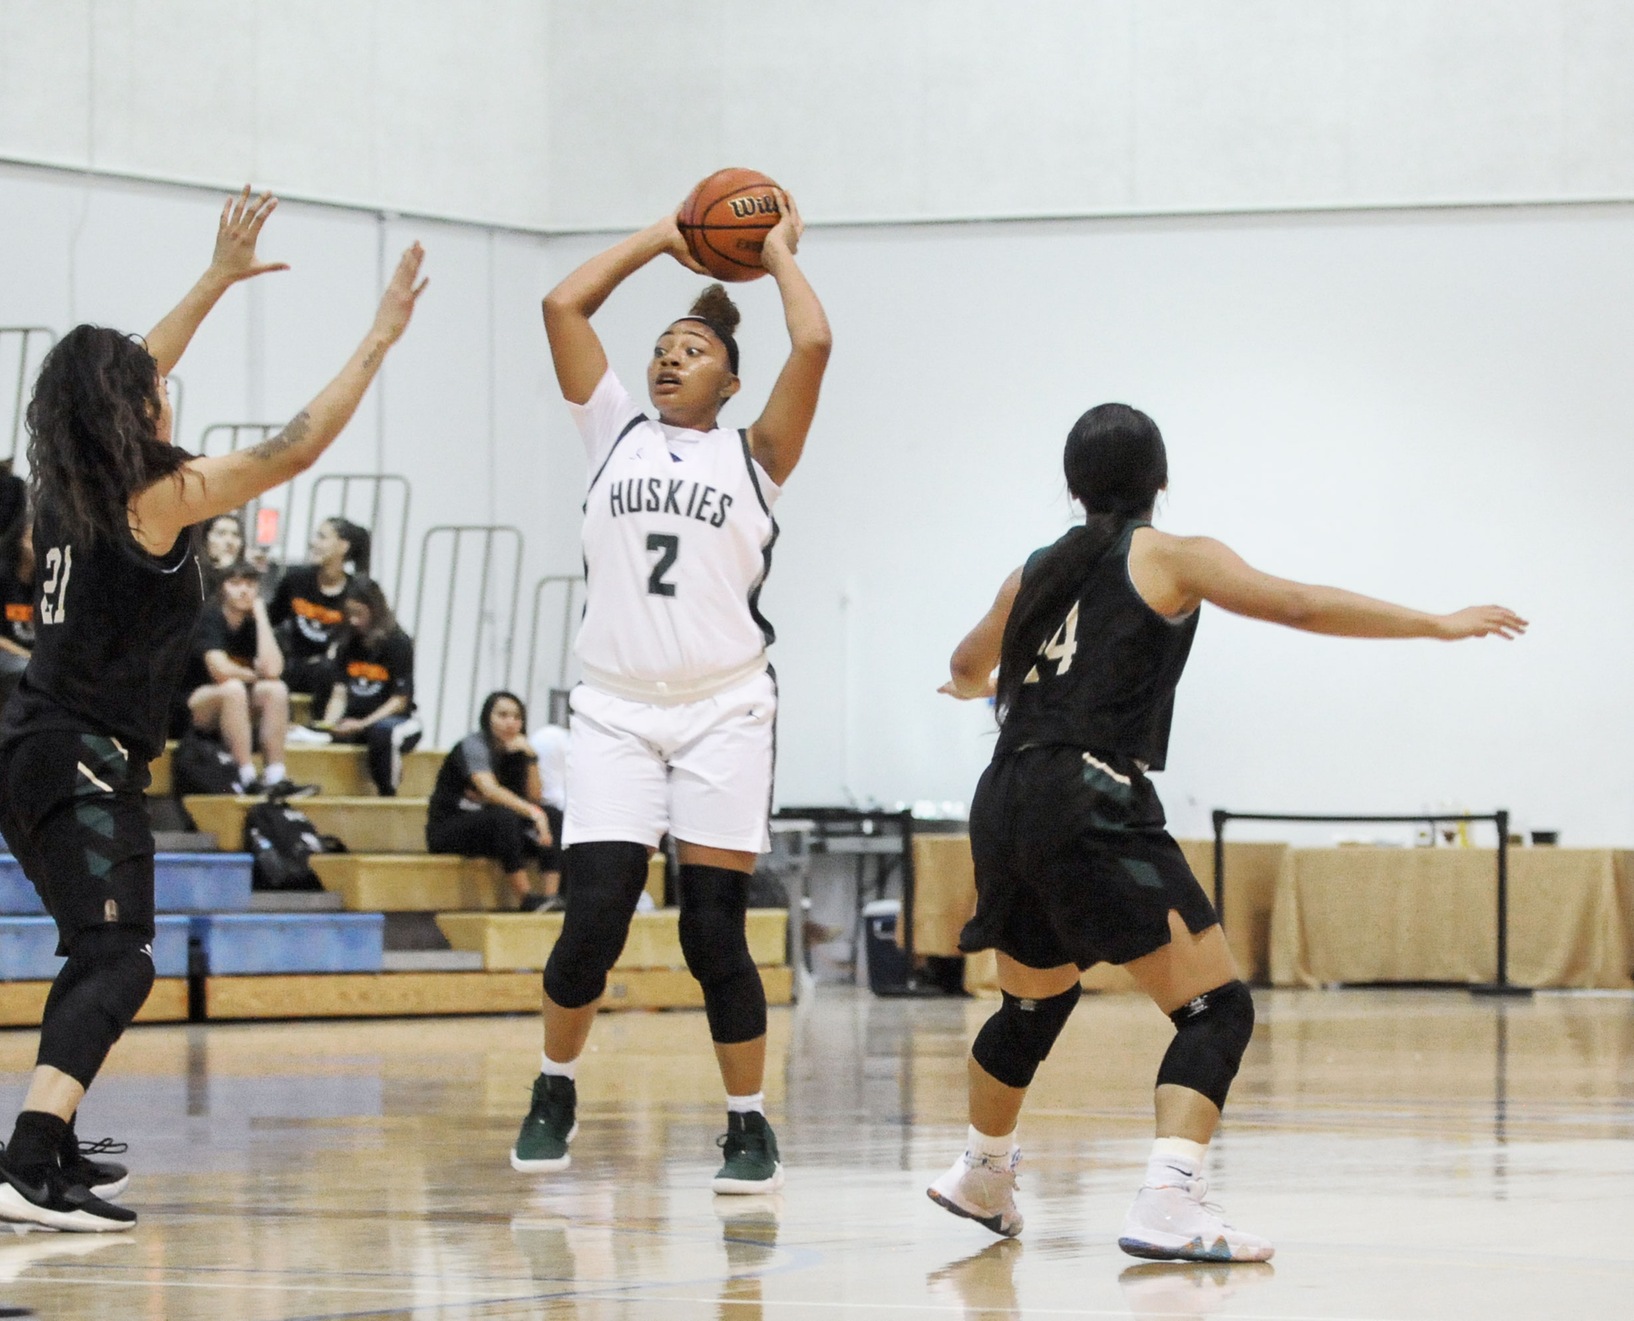 ELAC women’s basketball gets an 87-64 win over El Camino College